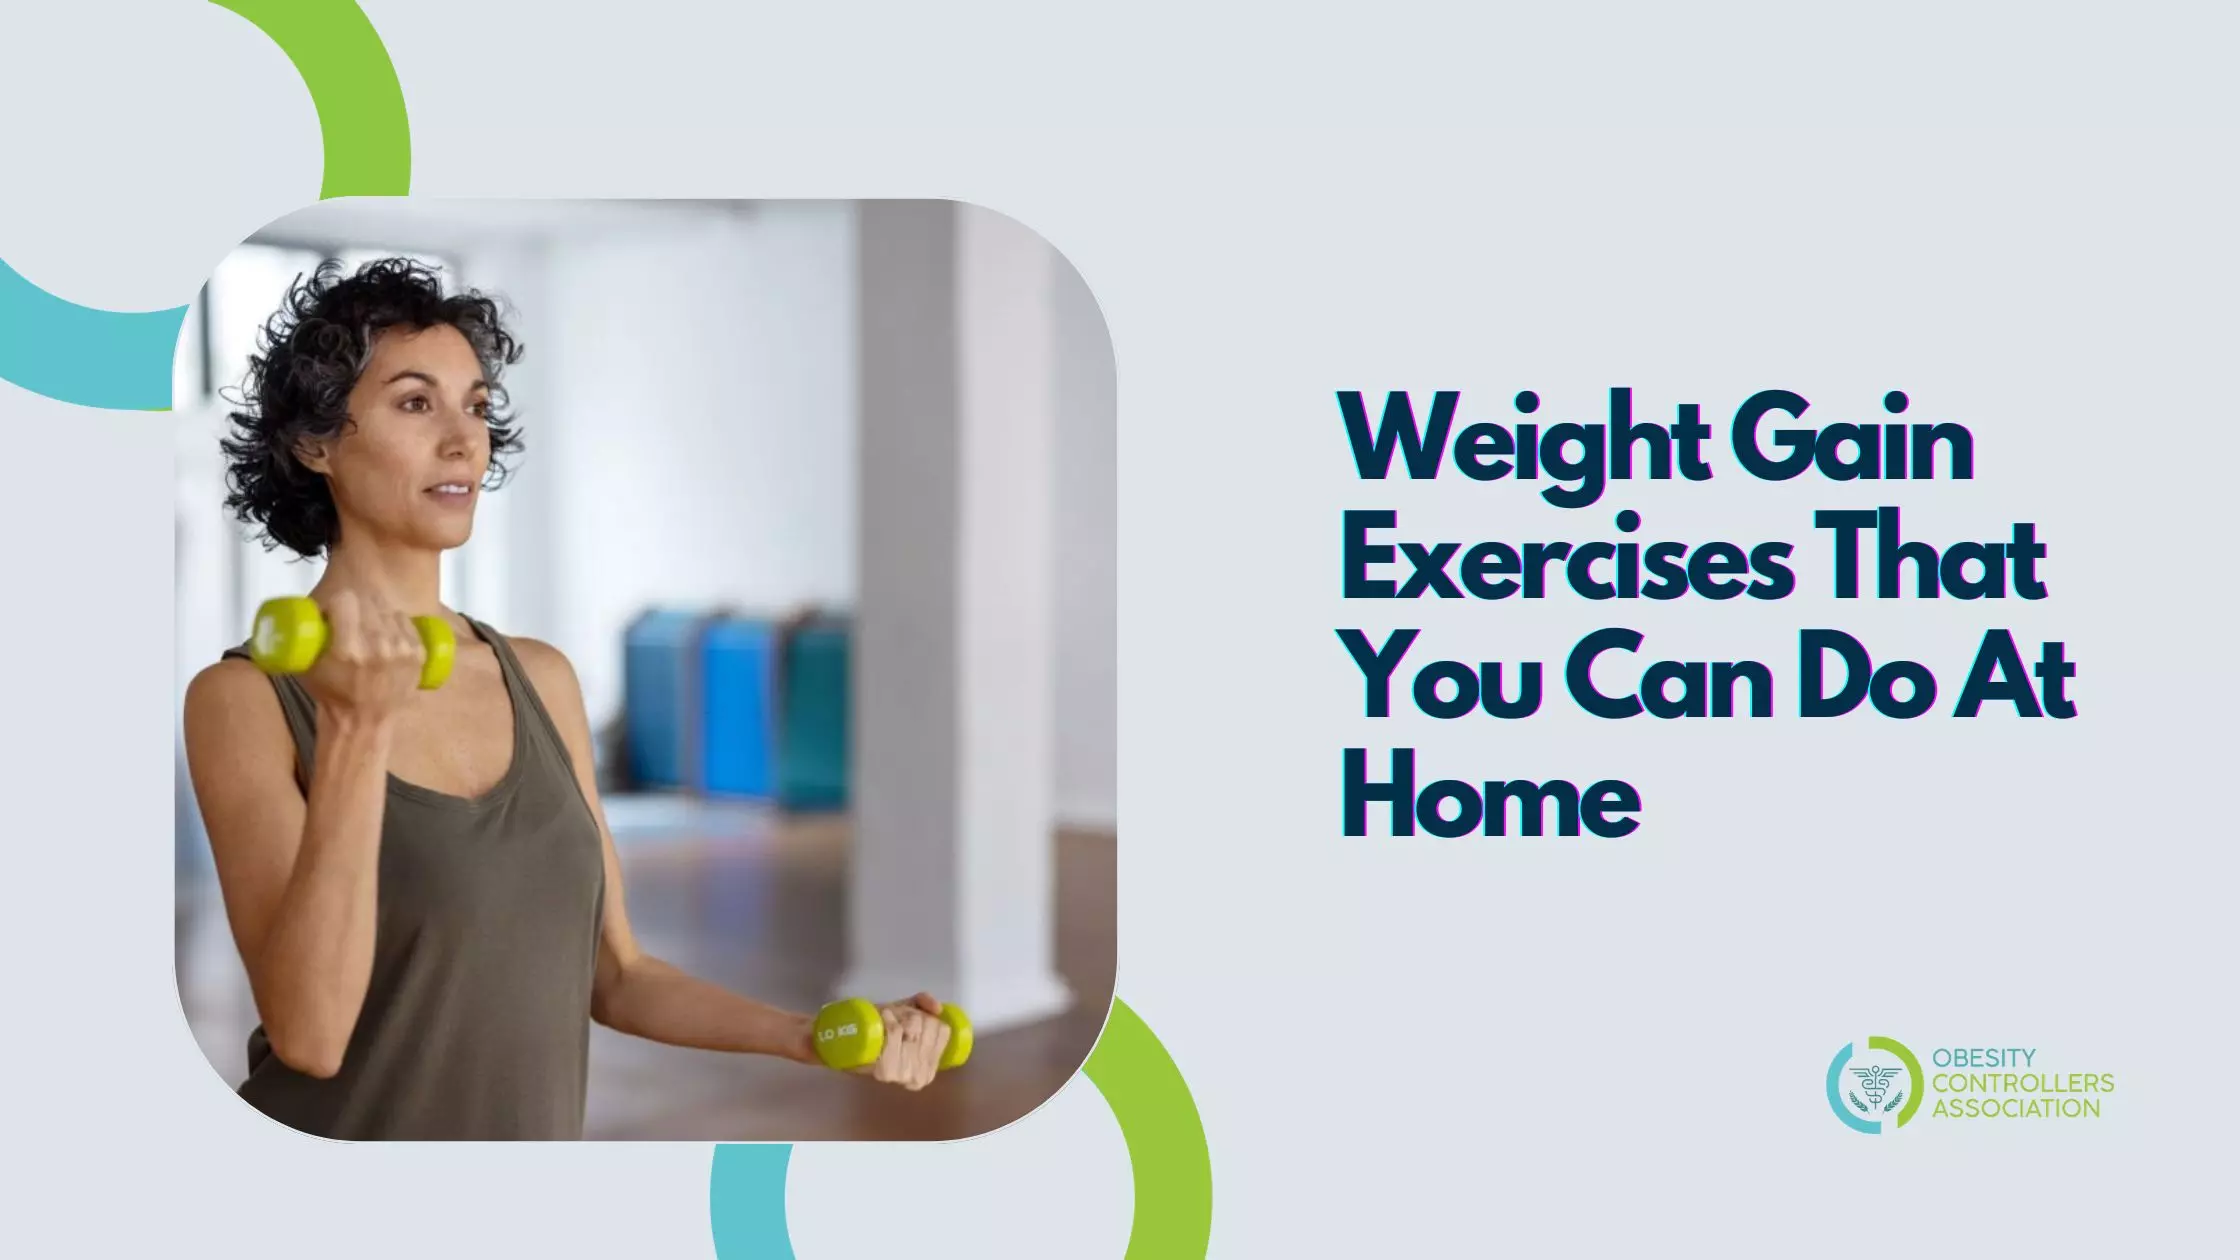 Weight Gain Exercises That You Can Do At Home